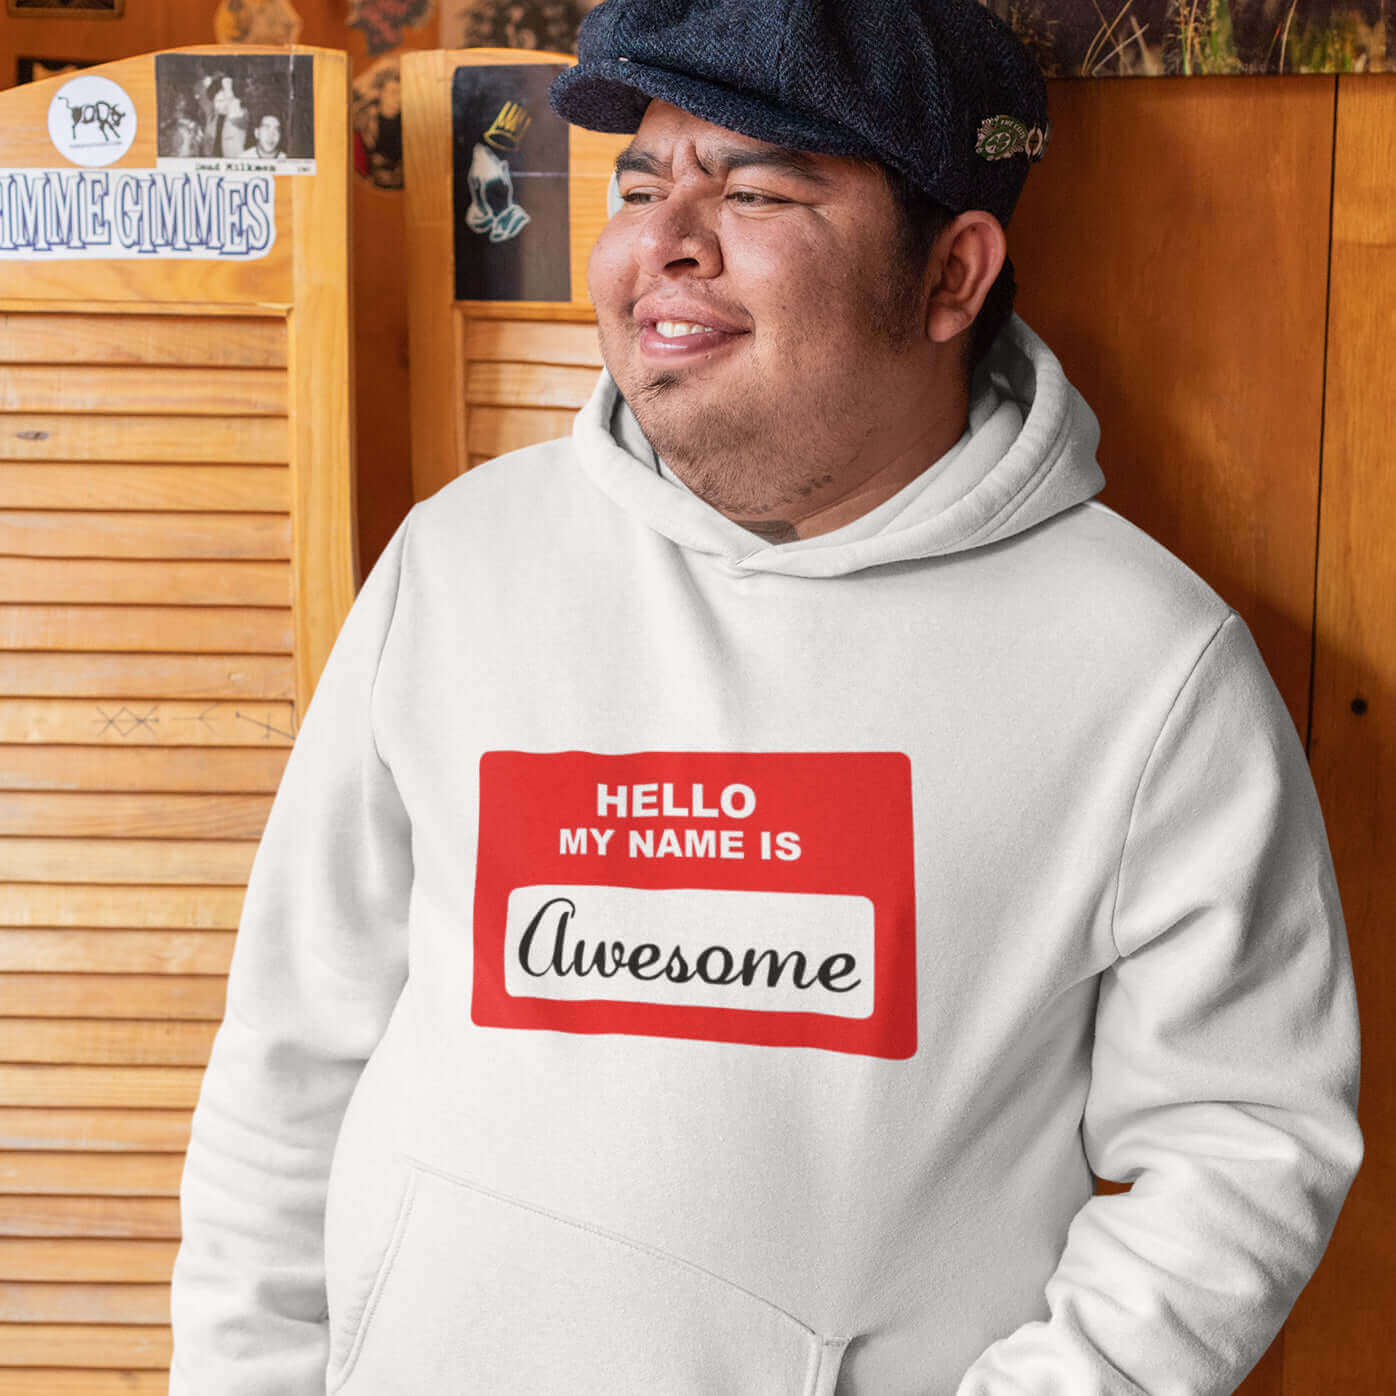 Man wearing a white hoodie sweatshirt with an image of a classic red and white sticker name tag that says Hello my name is Awesome printed on the front.